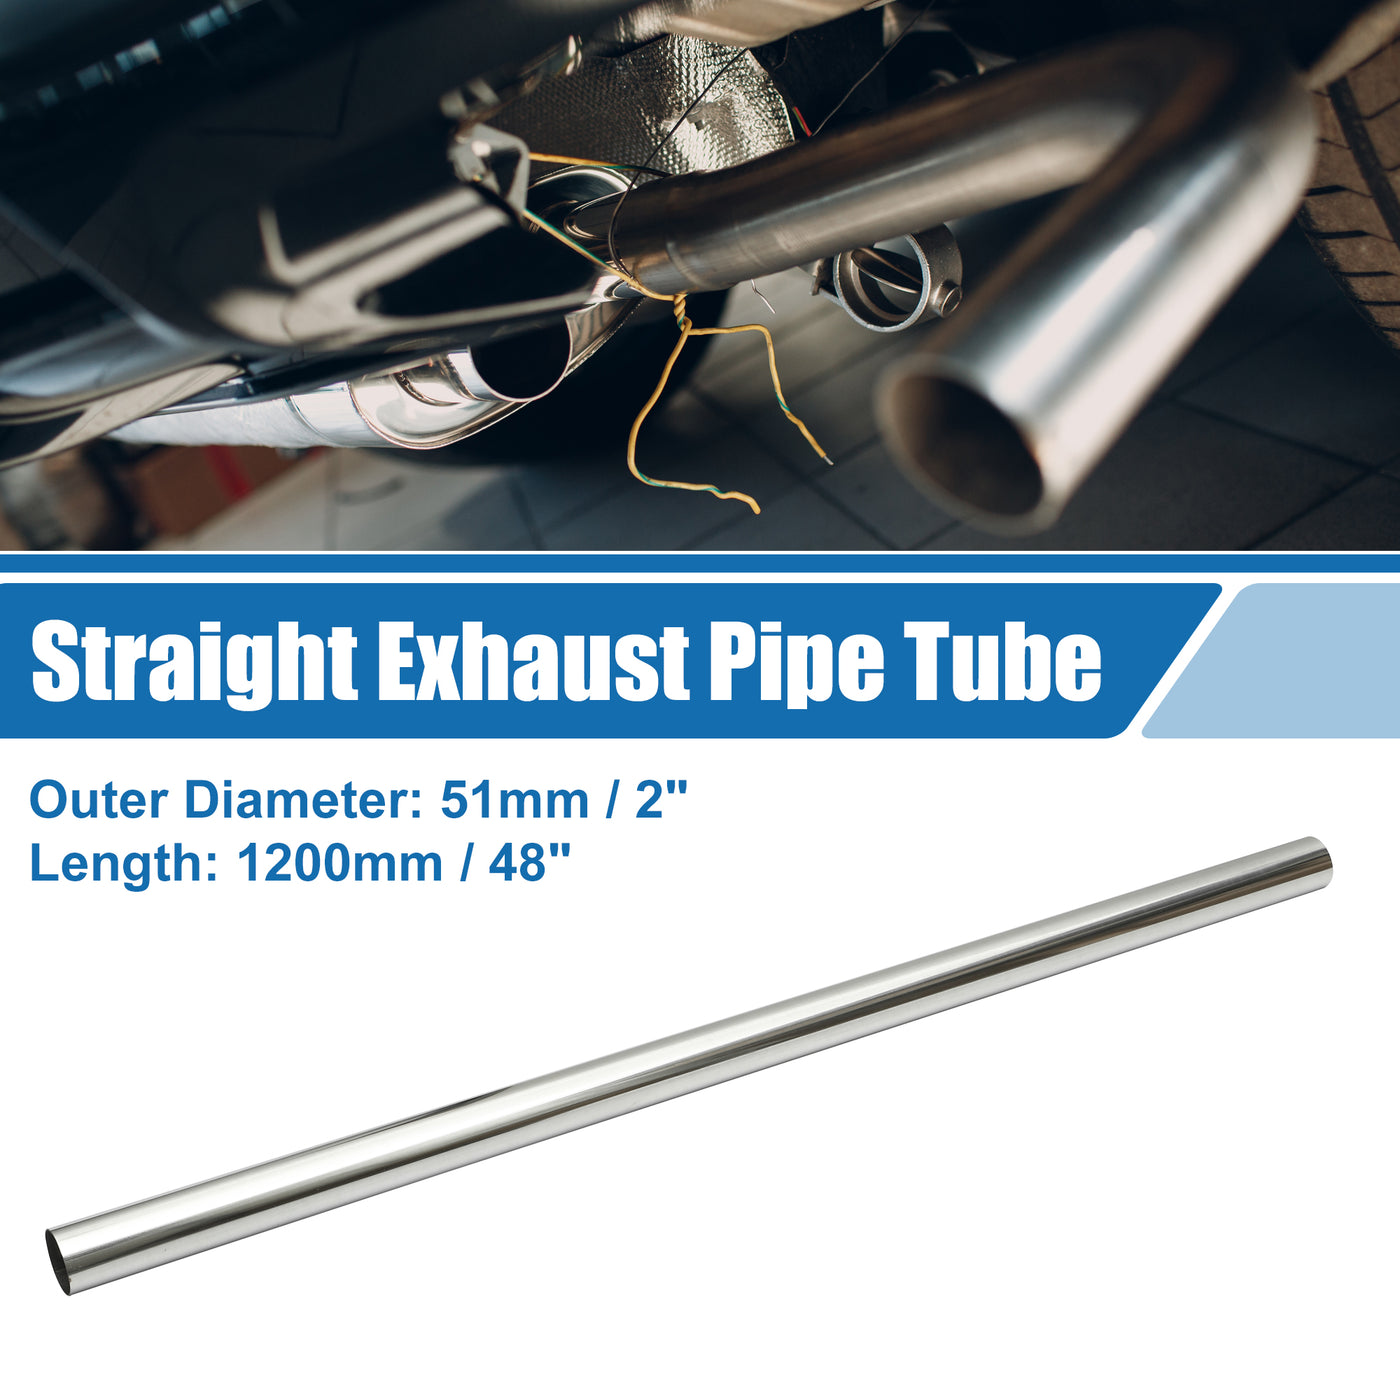 A ABSOPRO Car Mandrel Exhaust Pipe Tube Durable 48" Length 2'' OD Straight Exhaust Tube DIY Custom 0 Degree Modified Piping T304 Stainless Steel Silver Tone